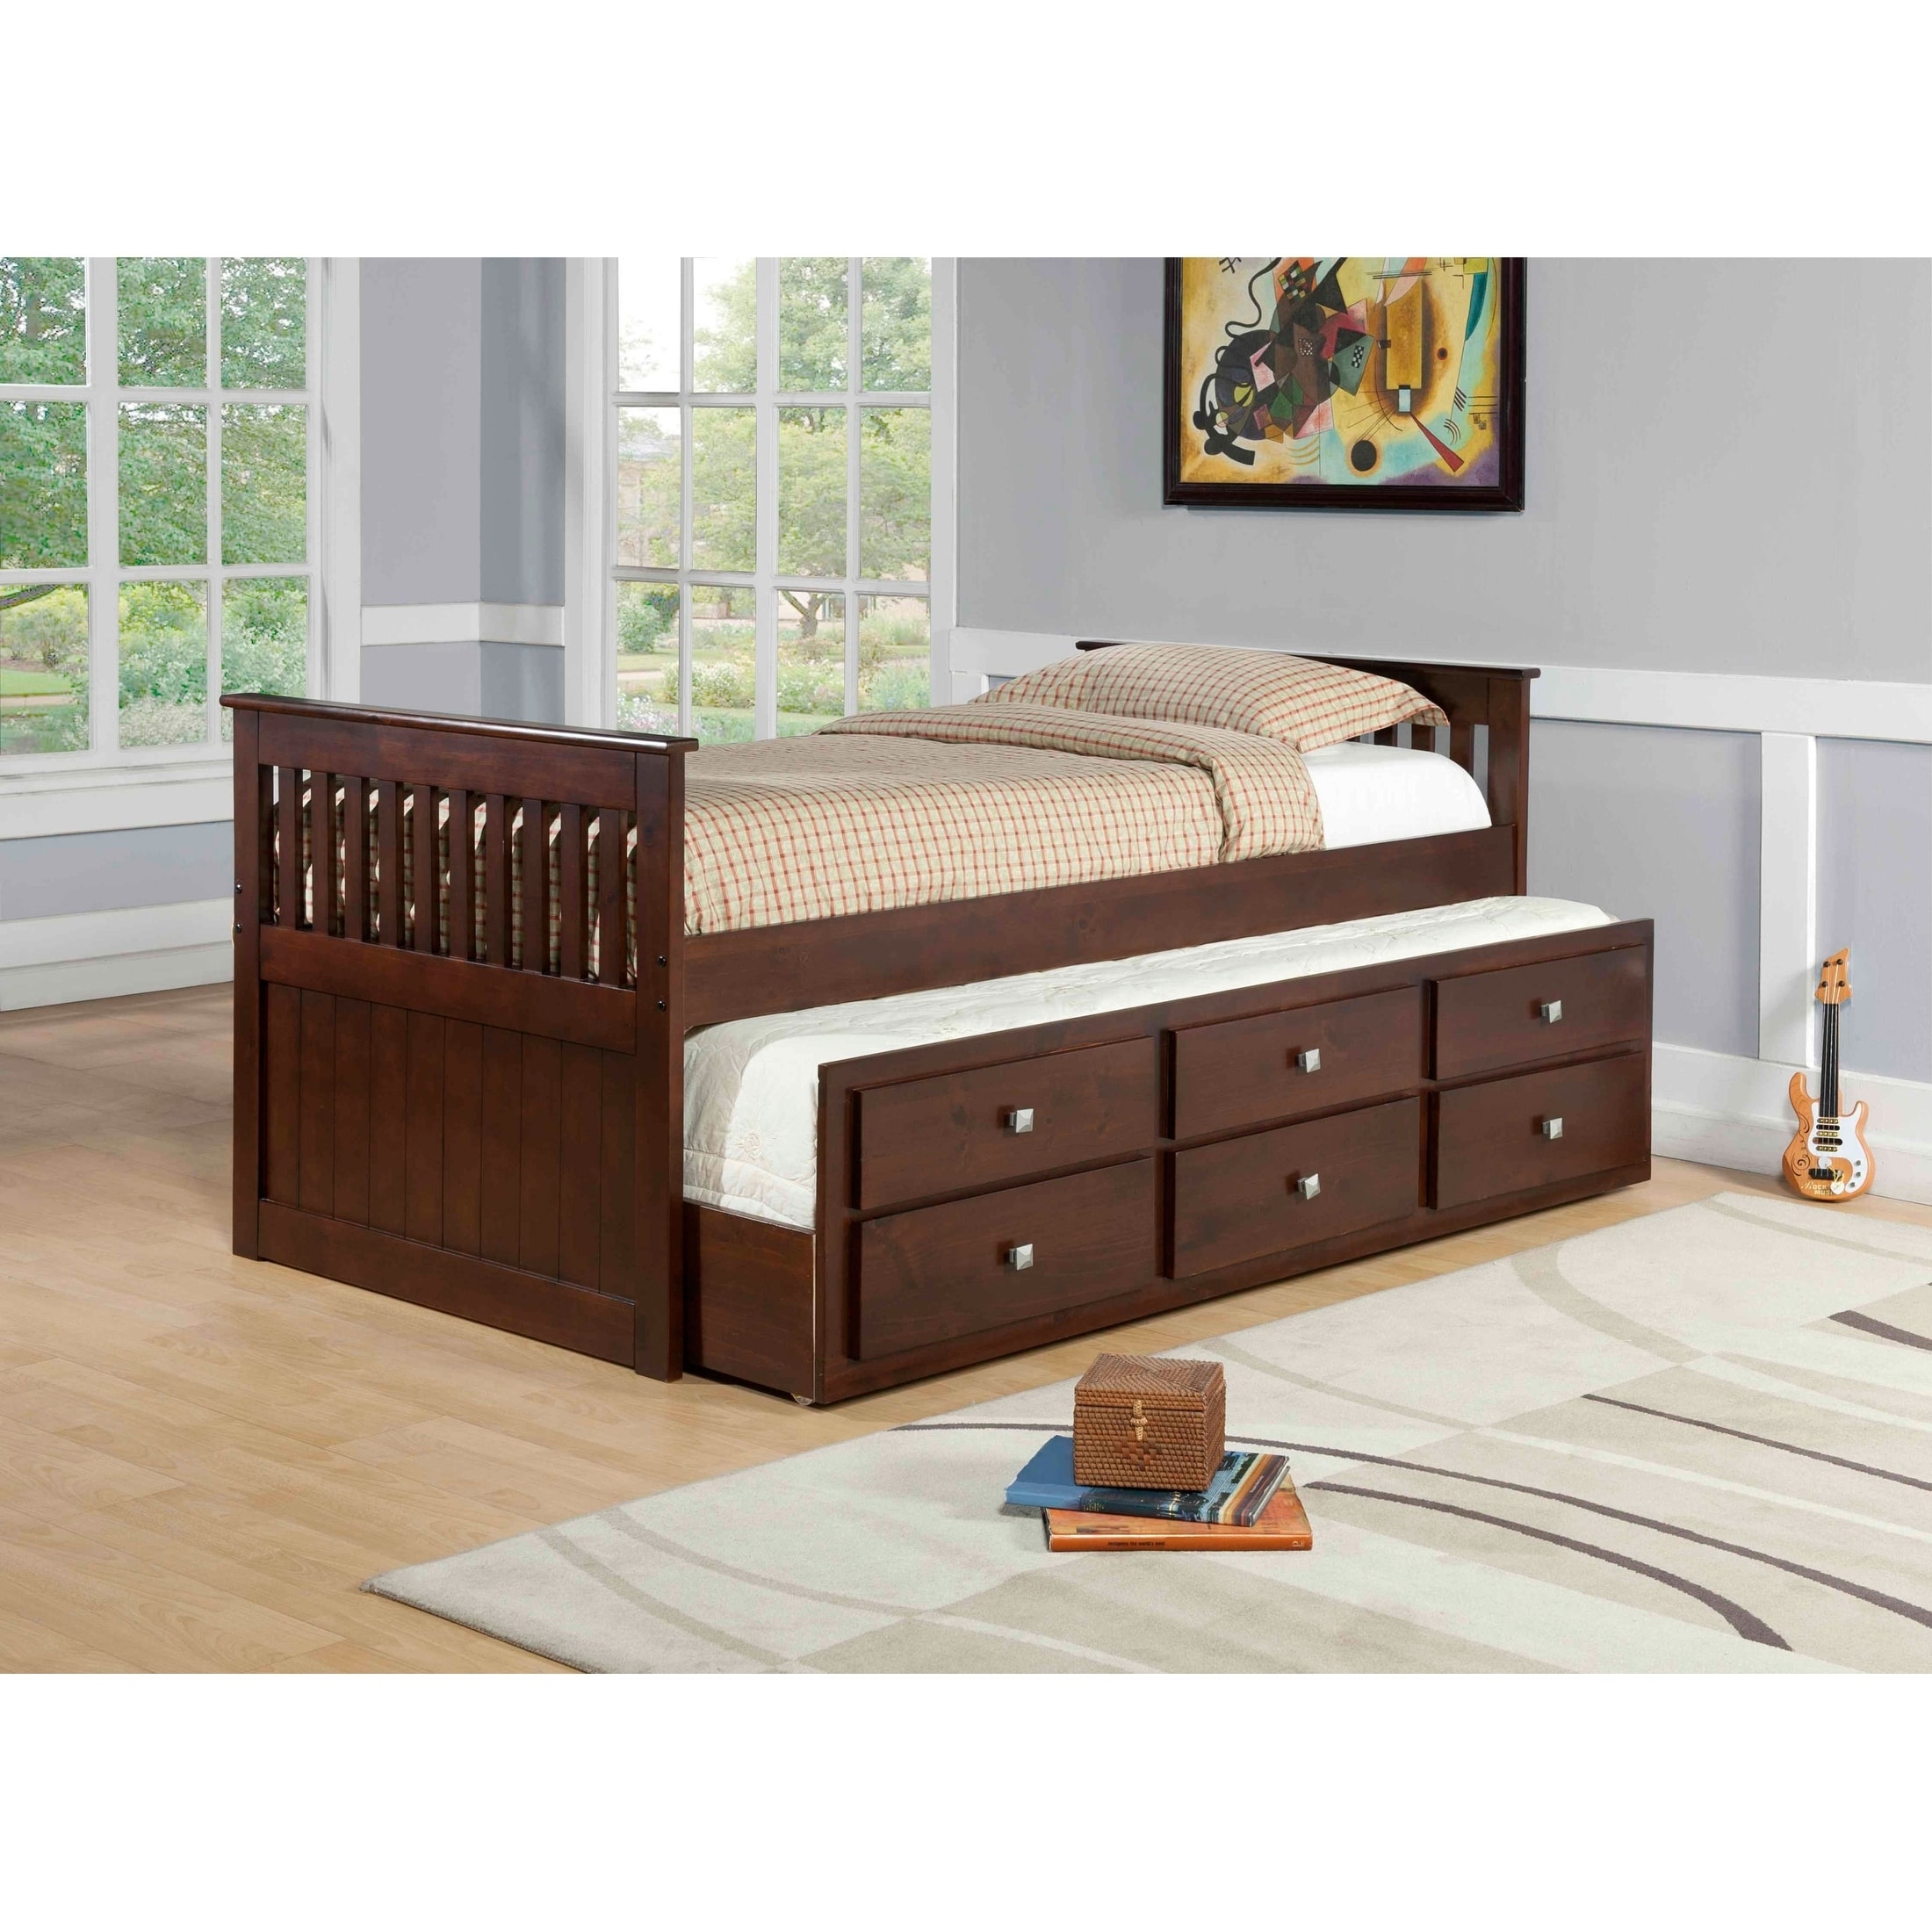 kids trundle bed with storage